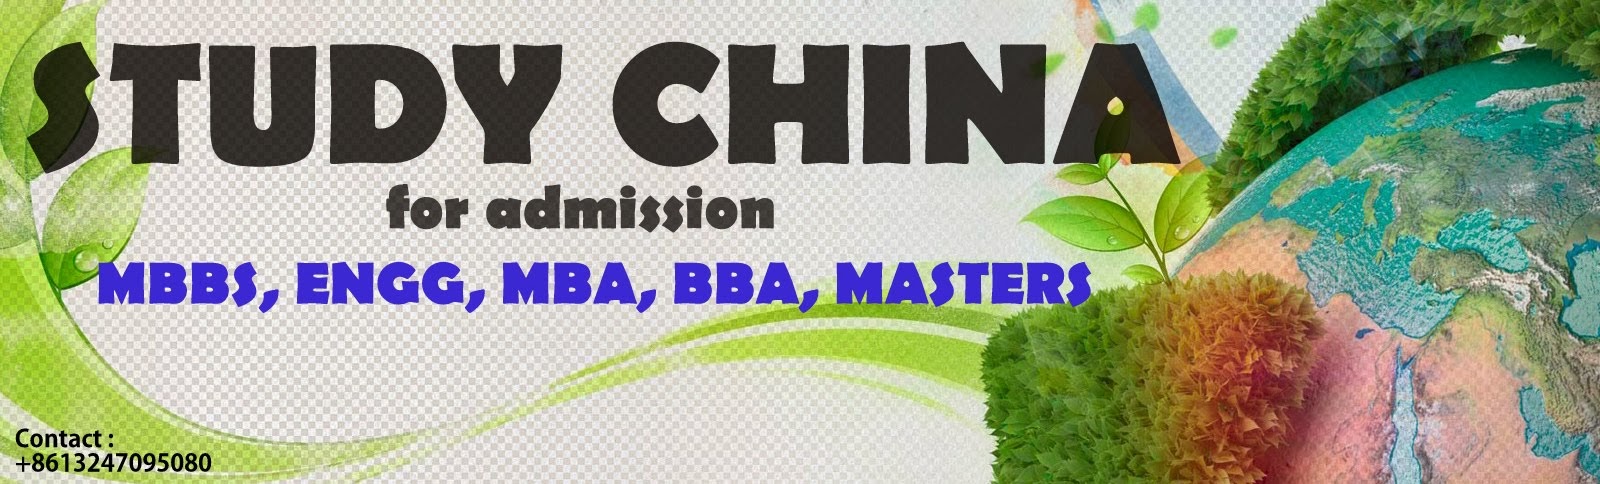 STUDY CHINA - for admission